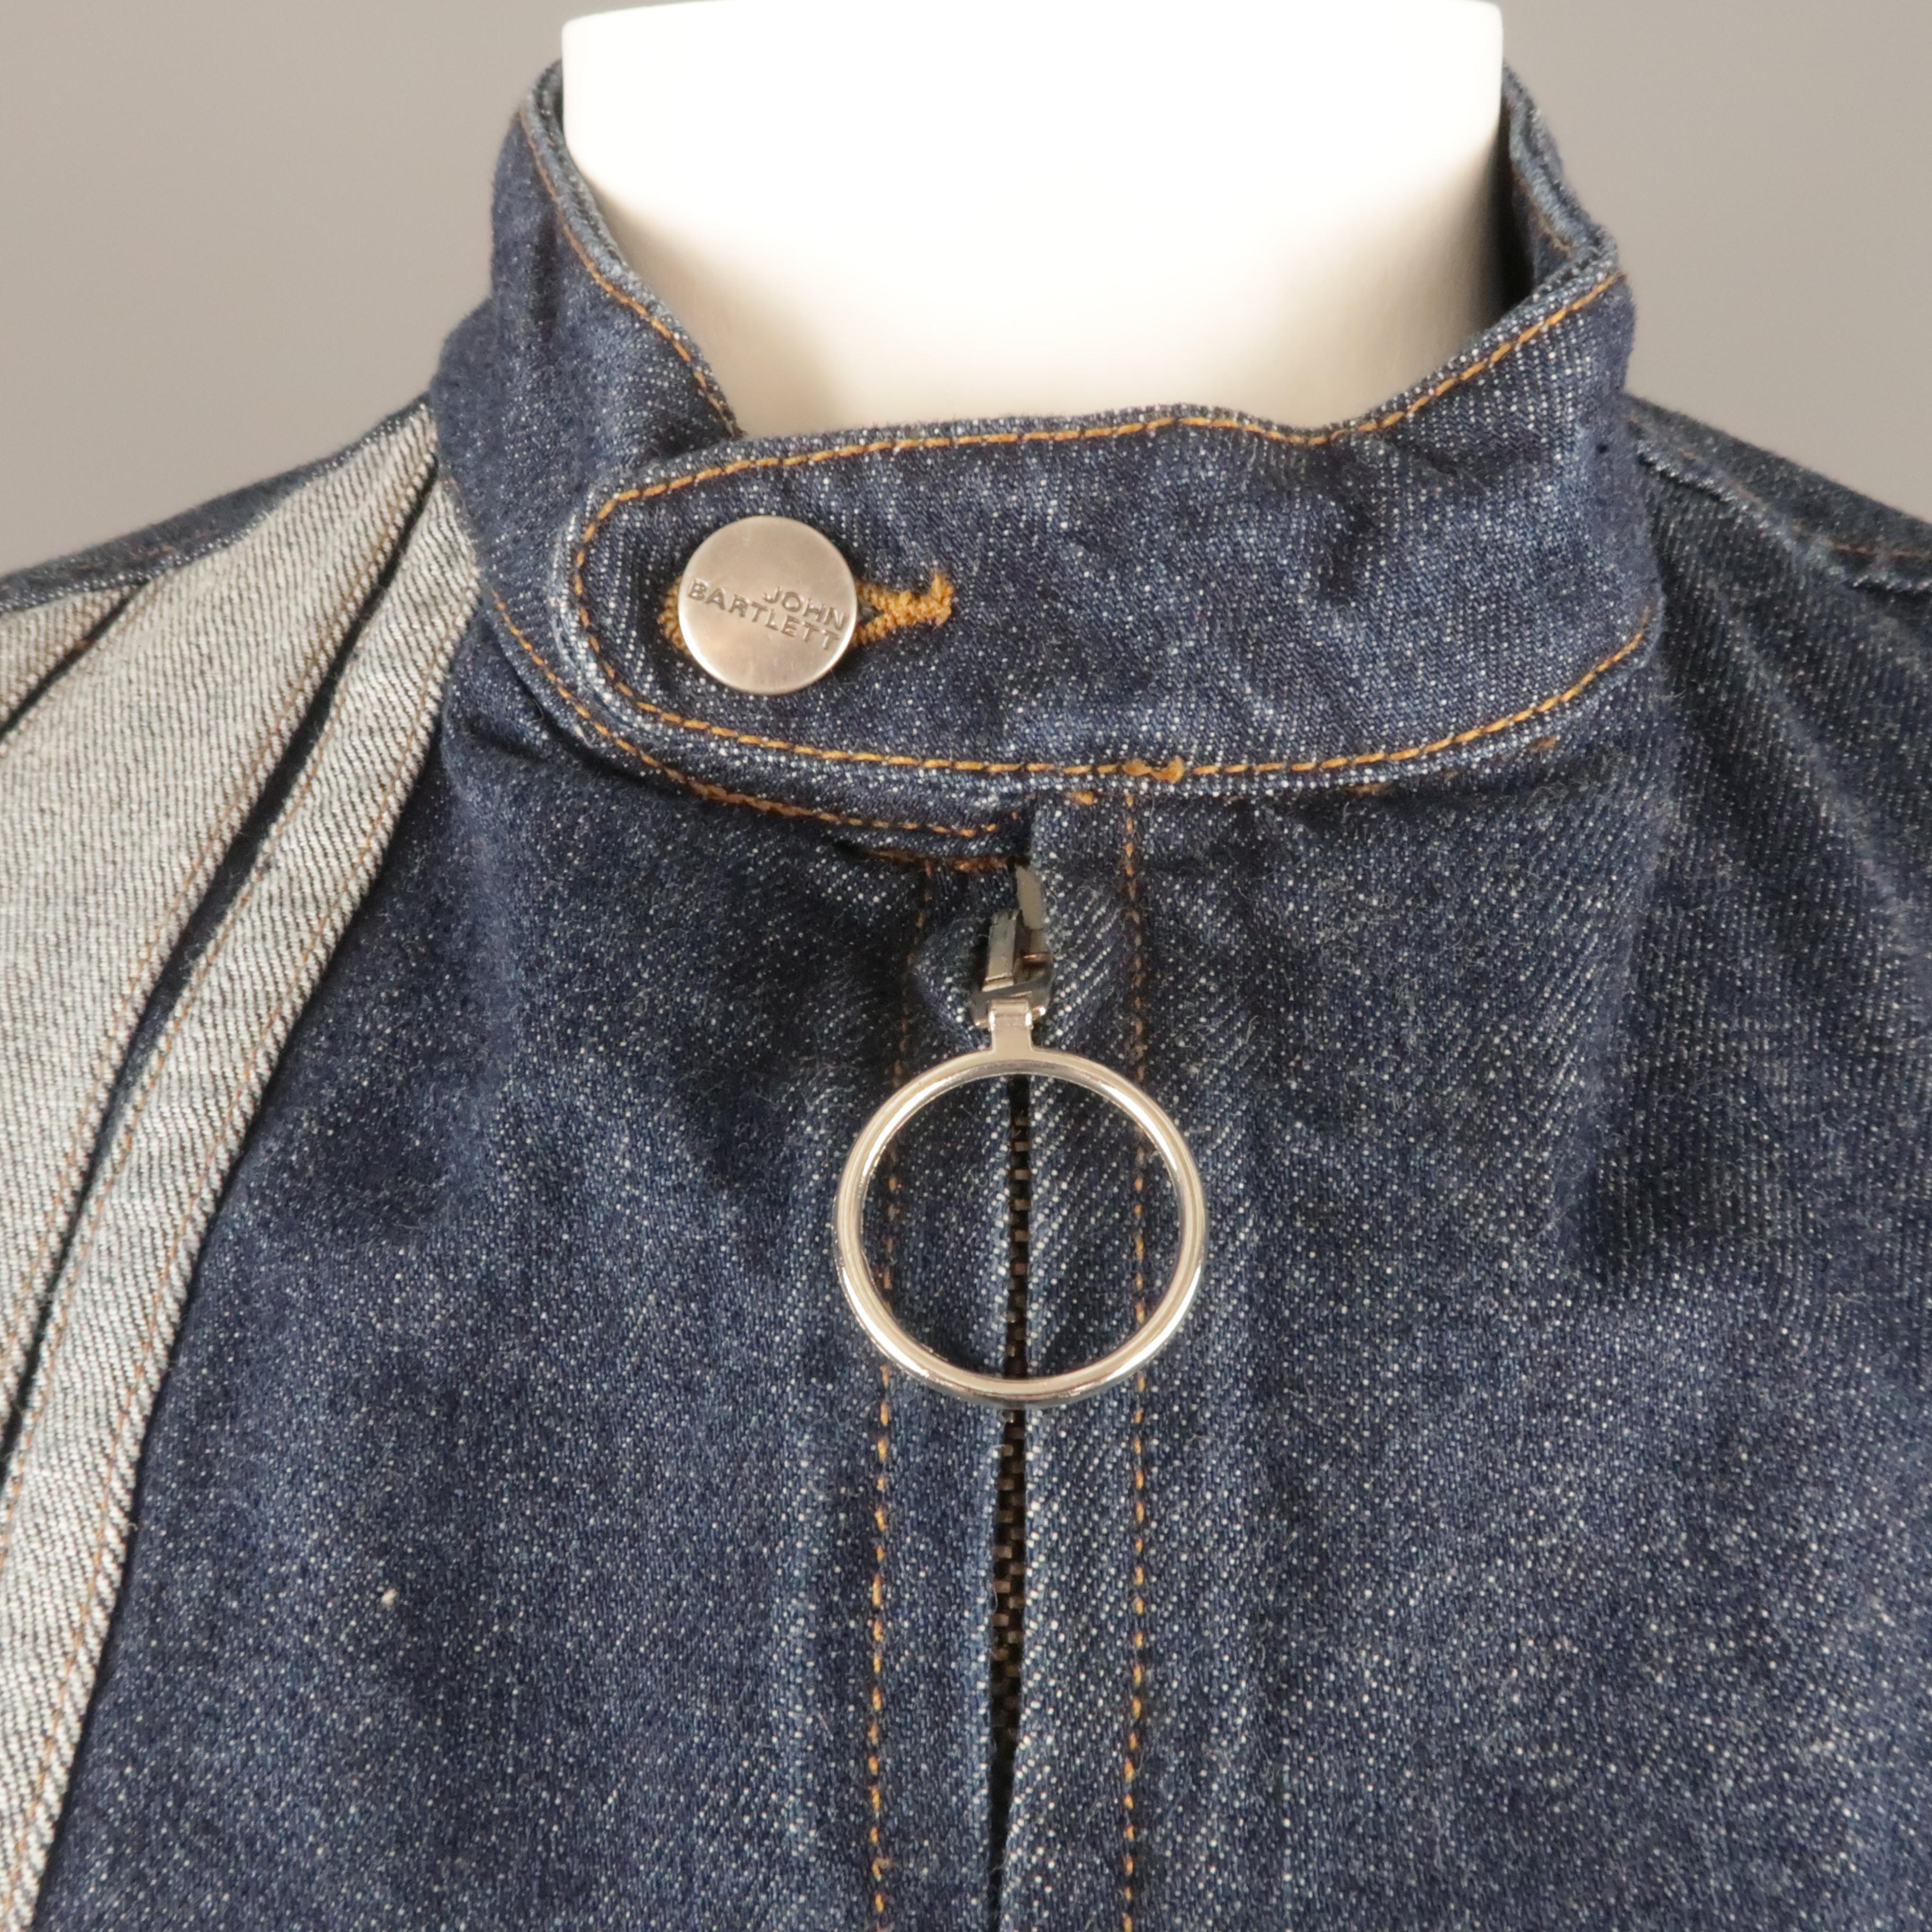 Vintage JOHN BARTLETT biker style jacket comes in classic indigo navy denim with a band button tab collar, zip up front with O tab, patch flap pocket, and reverse denim stripes. Made in Italy.
 
Excellent Pre-Owned Condition.
Marked: IT 52
